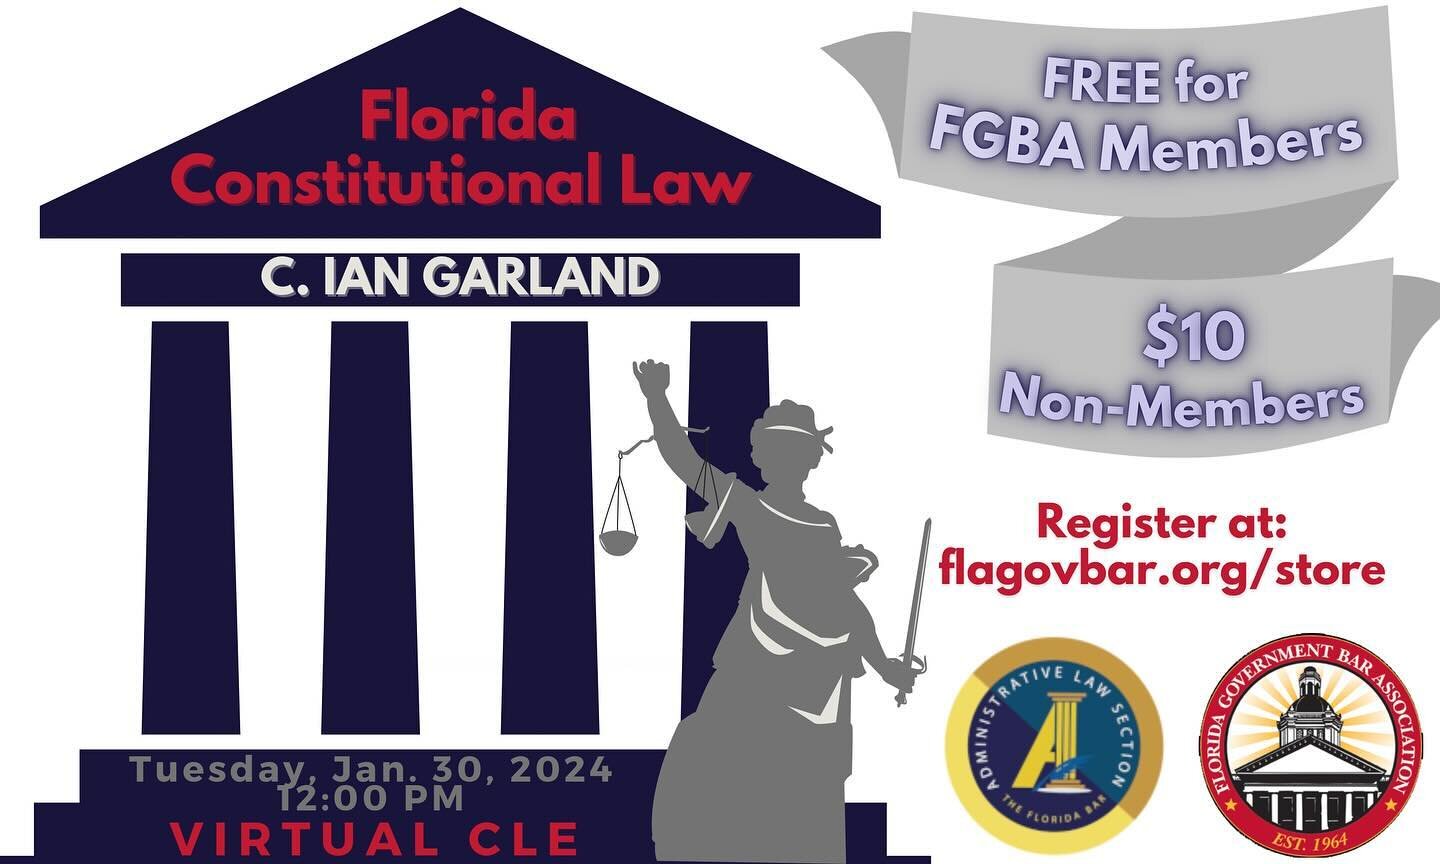 Please join us for this special virtual CLE with the Mr. C. Ian Garland who will  continue our SFGAP series by presenting on  Florida Constitutional Law. No registration is required for FGBA members. A link will be emailed to members the day before t